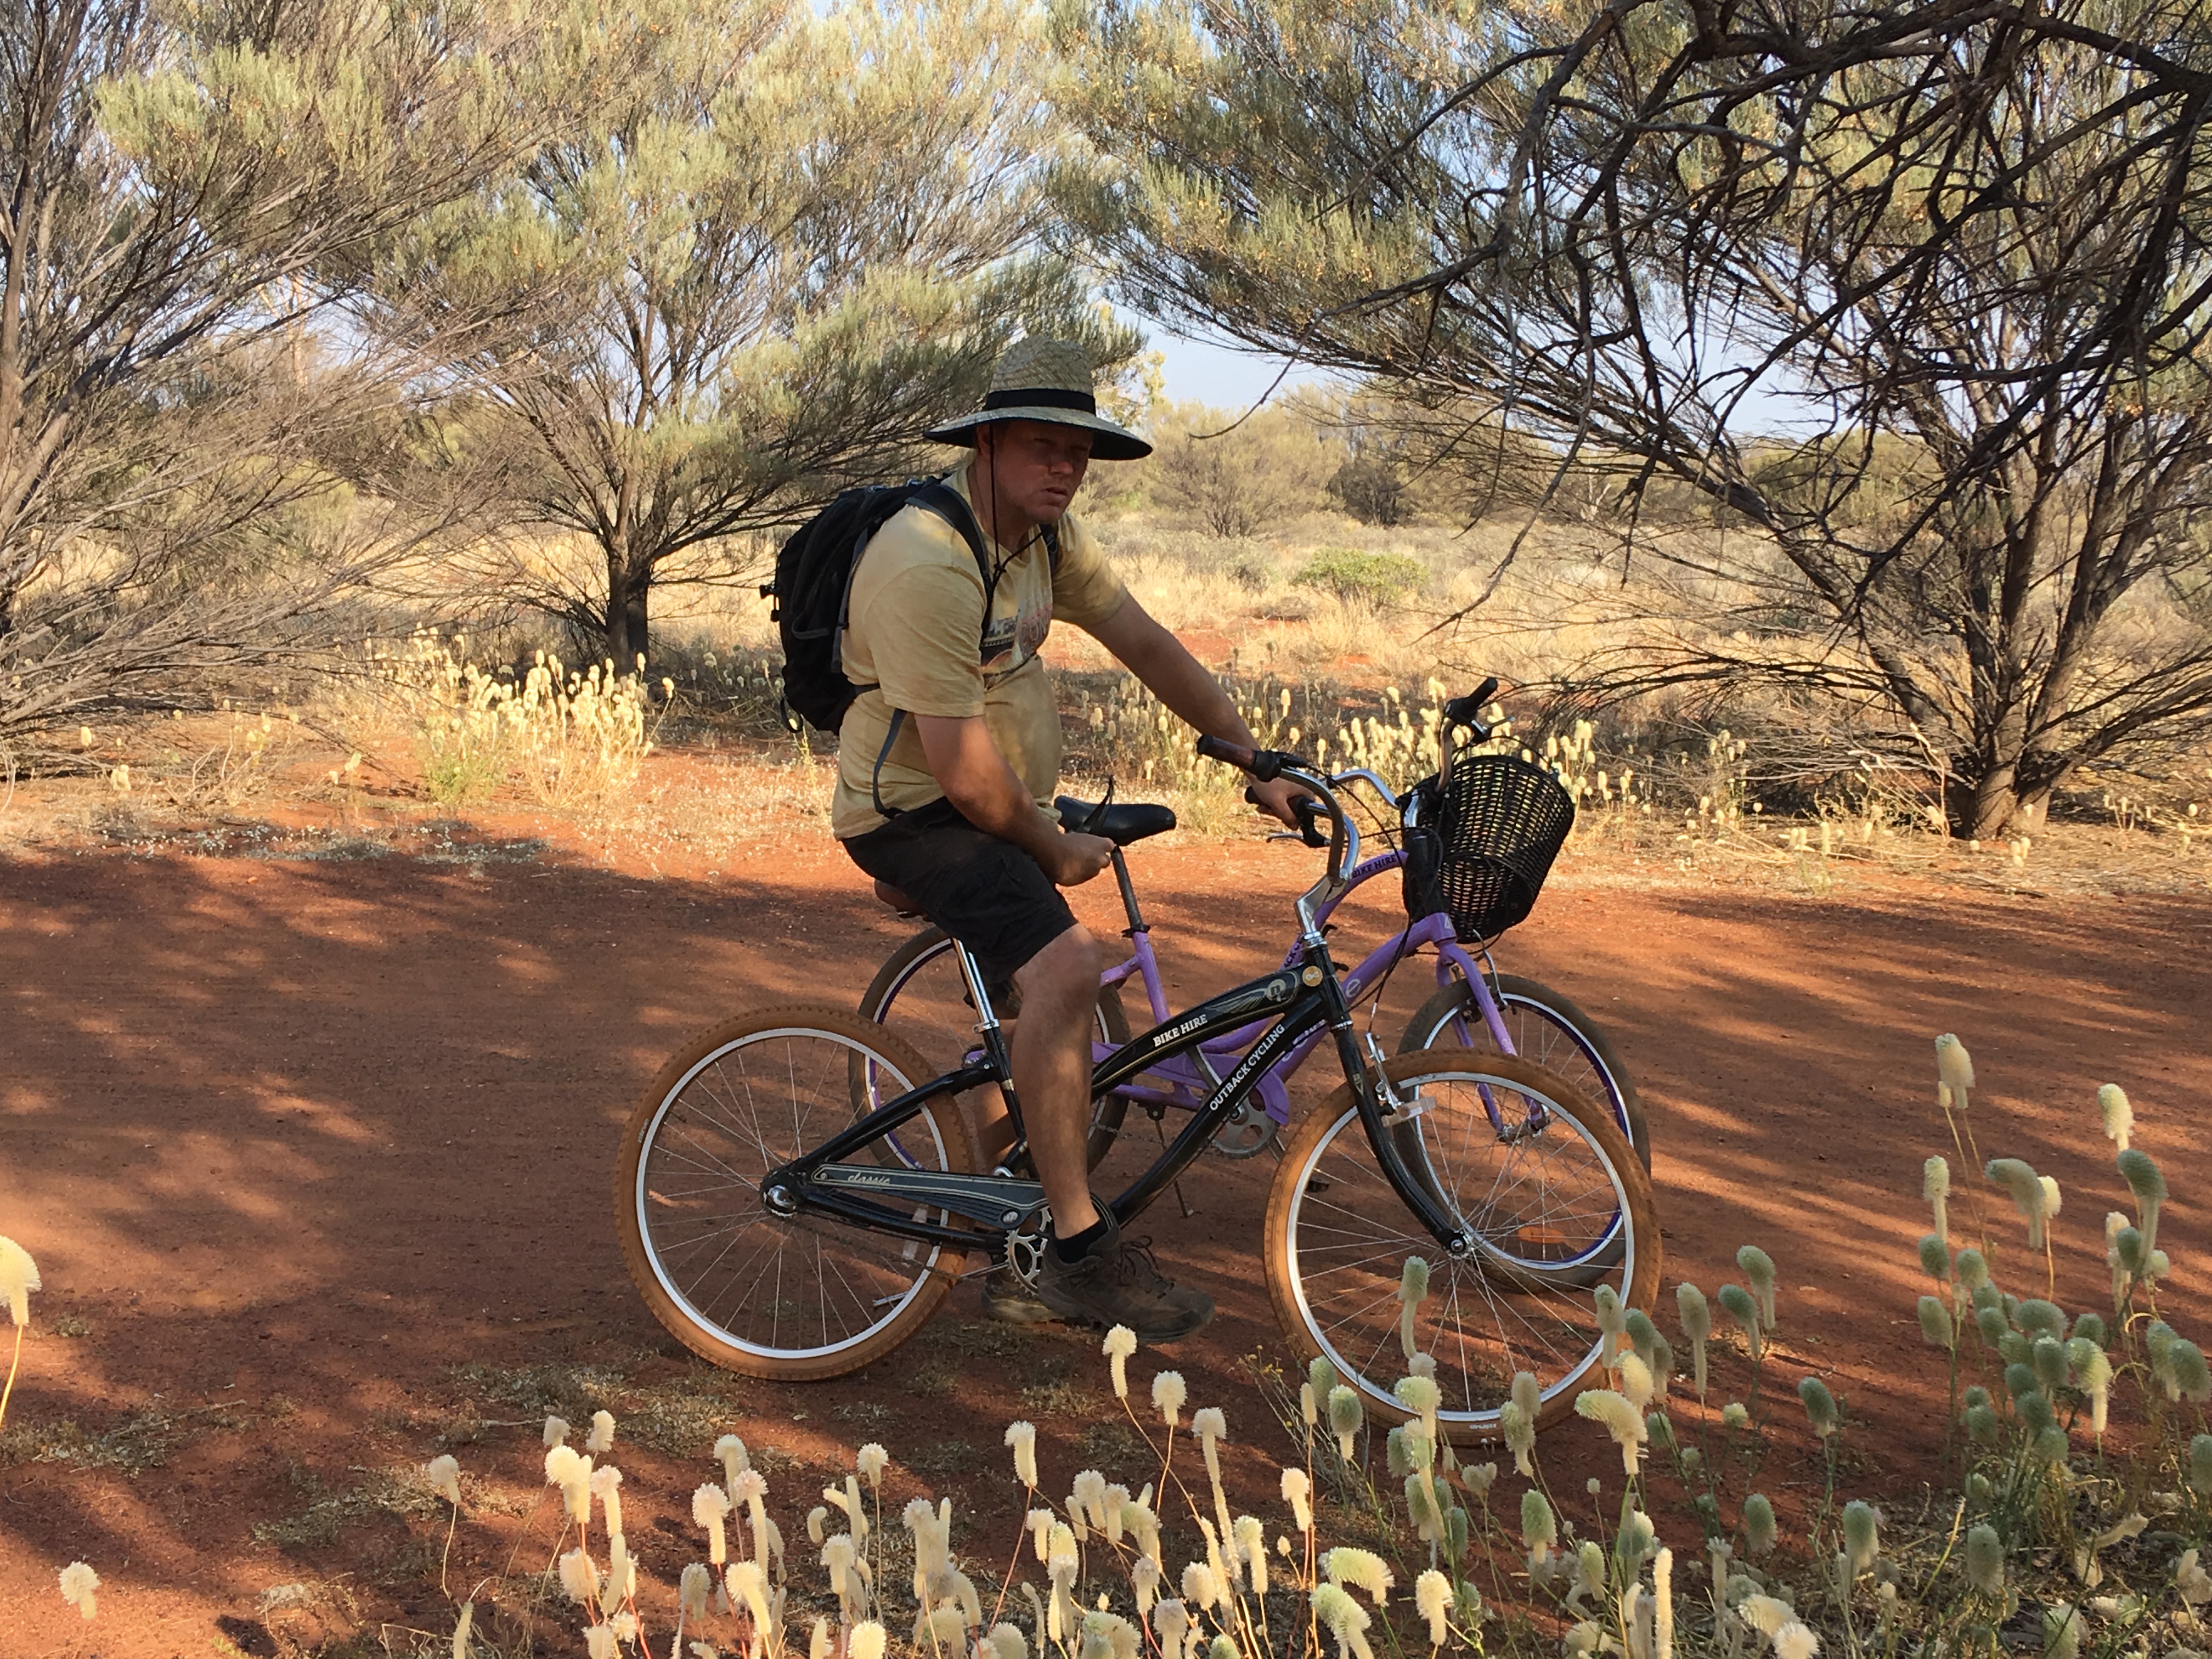 After waking up to see the sunrise, we set off early to go and cycle around Uluru.